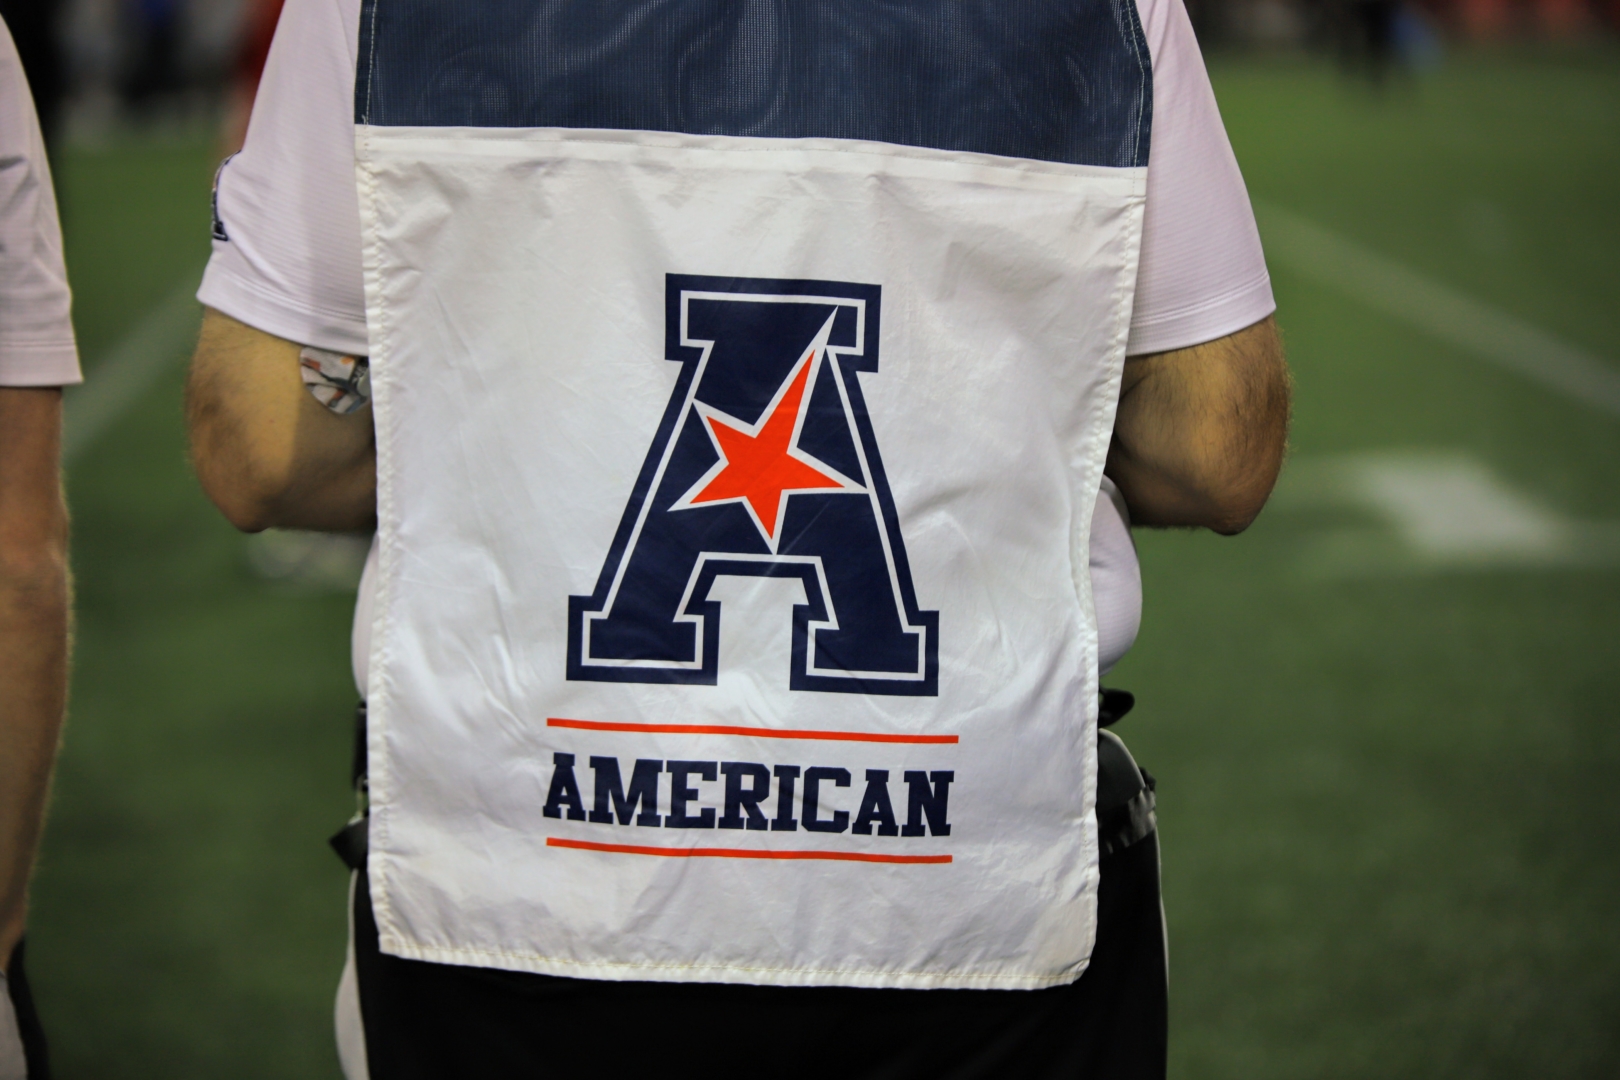 College football has kicked off all across the AAC, officially ringing in the 2022 season. | Jhair Romero/The Cougar